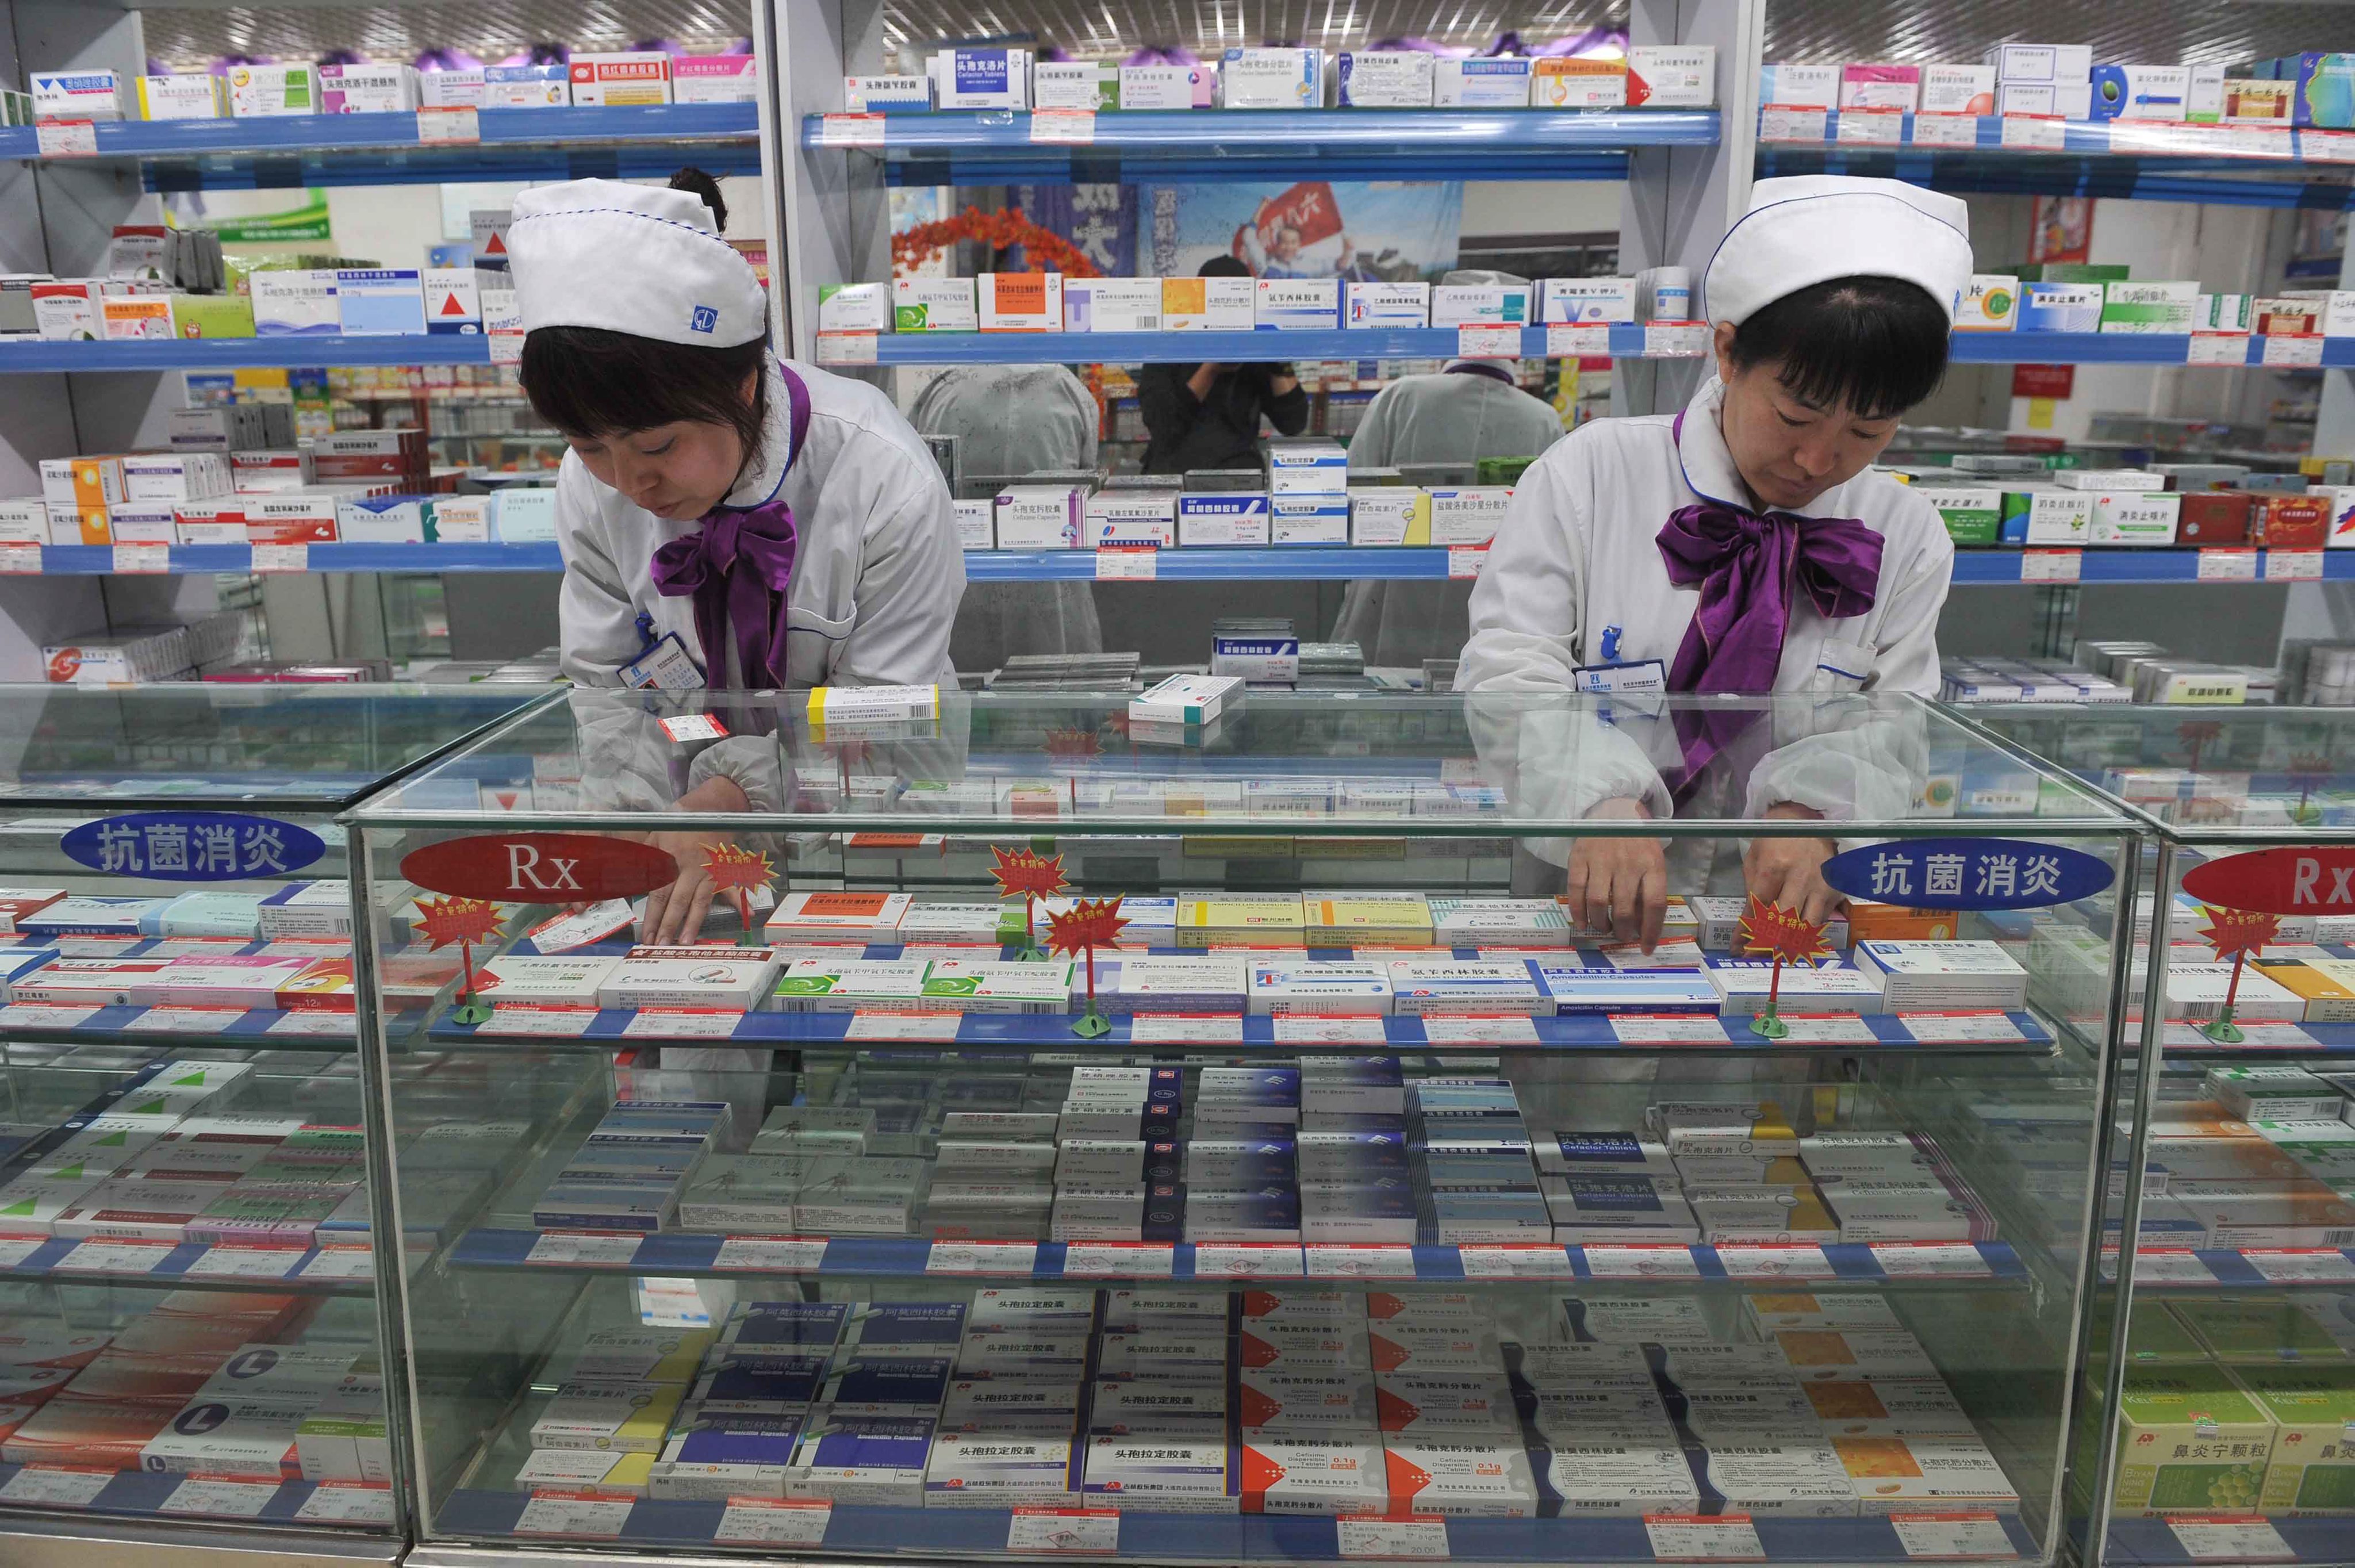 The shares of Hong Kong-listed pharmaceutical companies serving the mainland China market have enjoyed strong gains since April. Photo: EPA